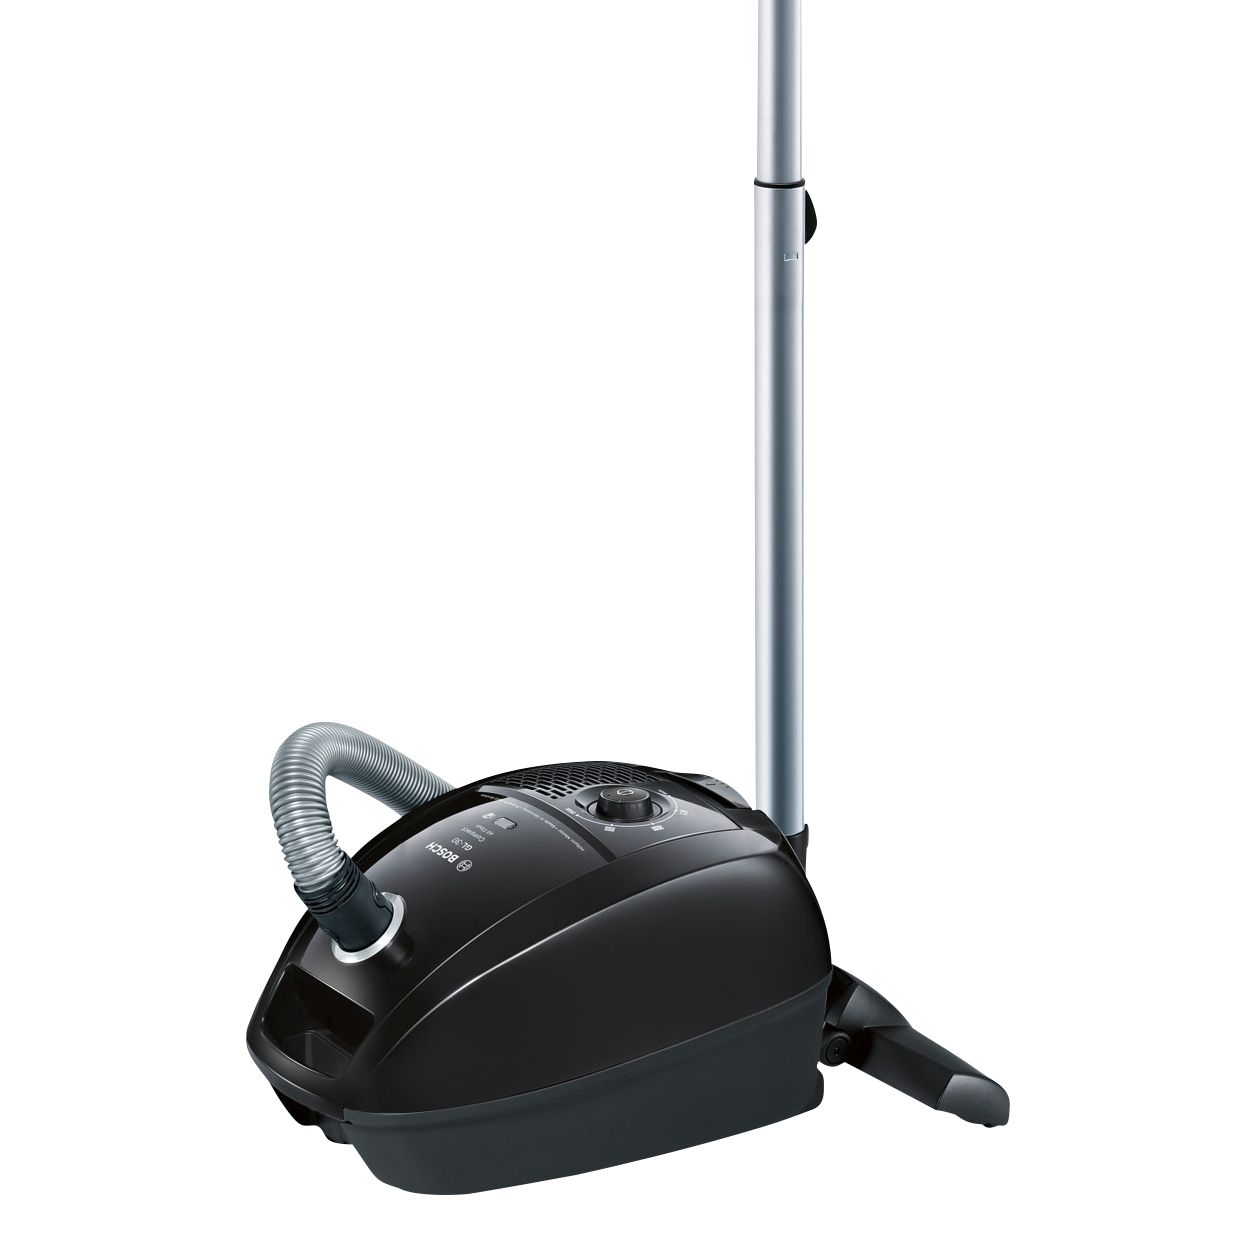 Bosch Bgl3allgb Compact All Floor Cylinder Vacuum Cleaner Black At John Lewis Partners